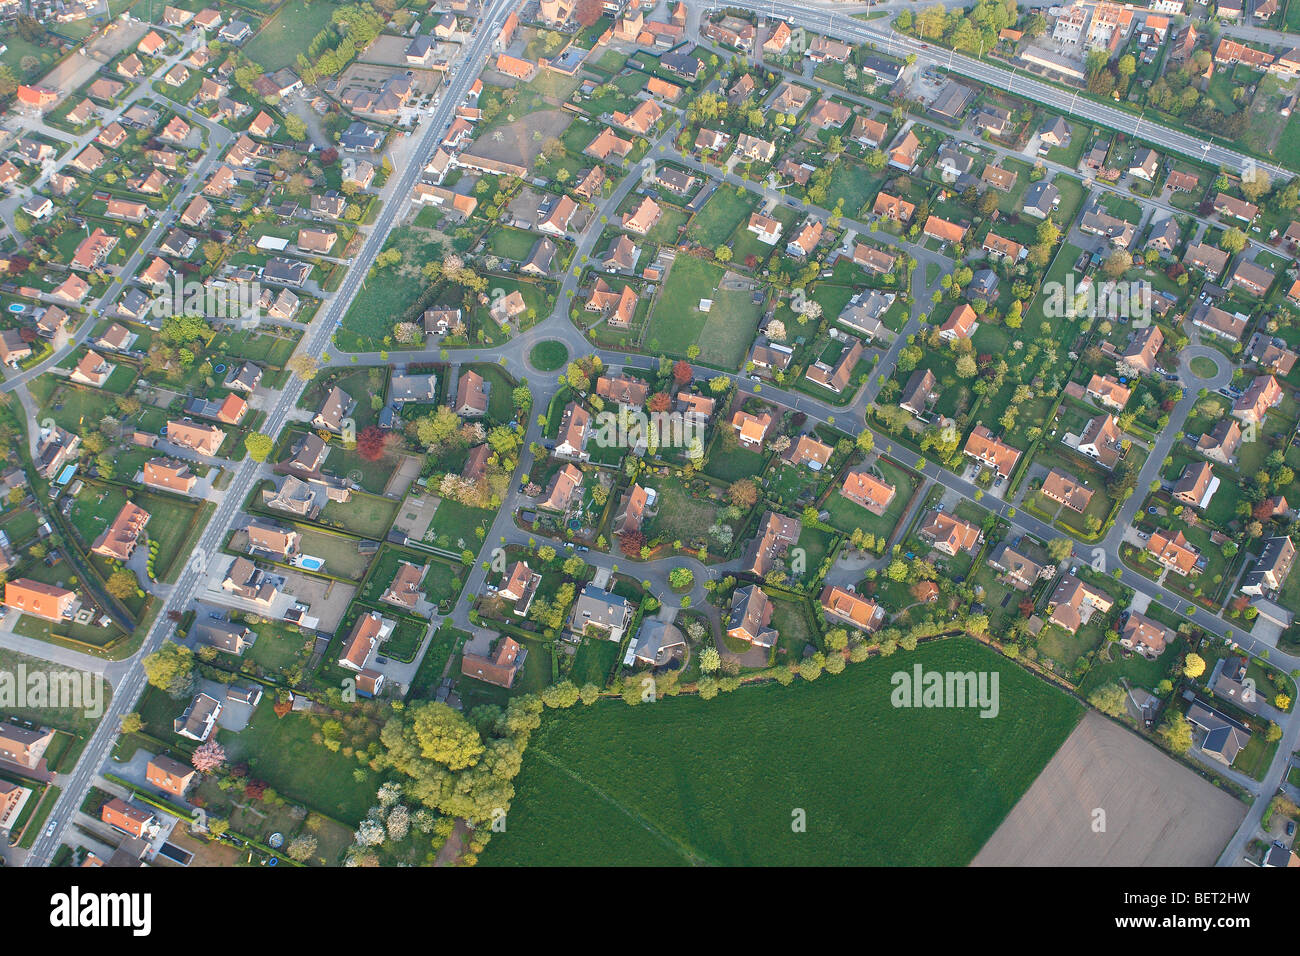 Ribbon development, urbanisation at the border of agricultural area from the air, Belgium Stock Photo